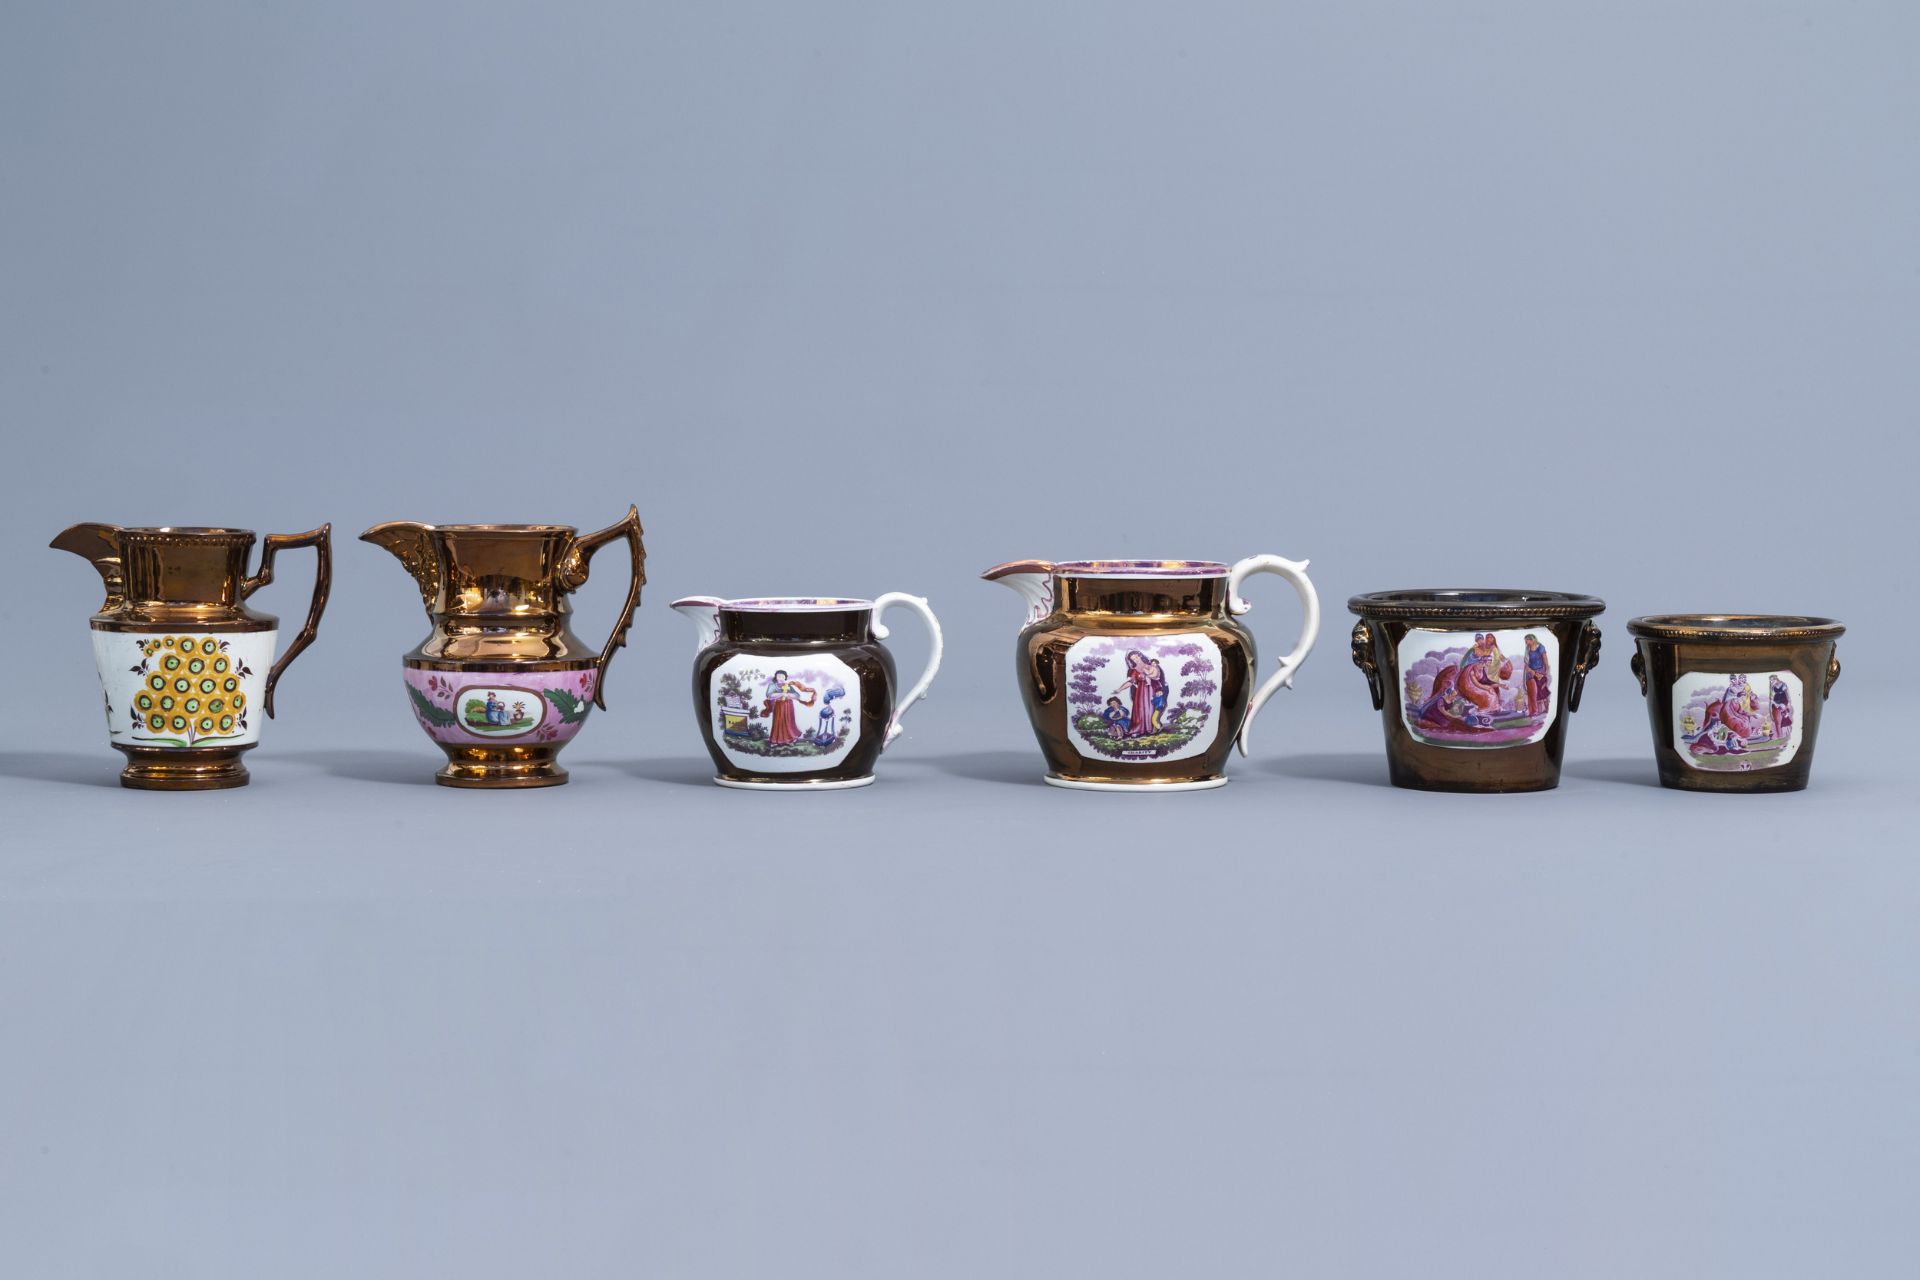 A varied collection of English lustreware items, 19th C. - Image 39 of 44